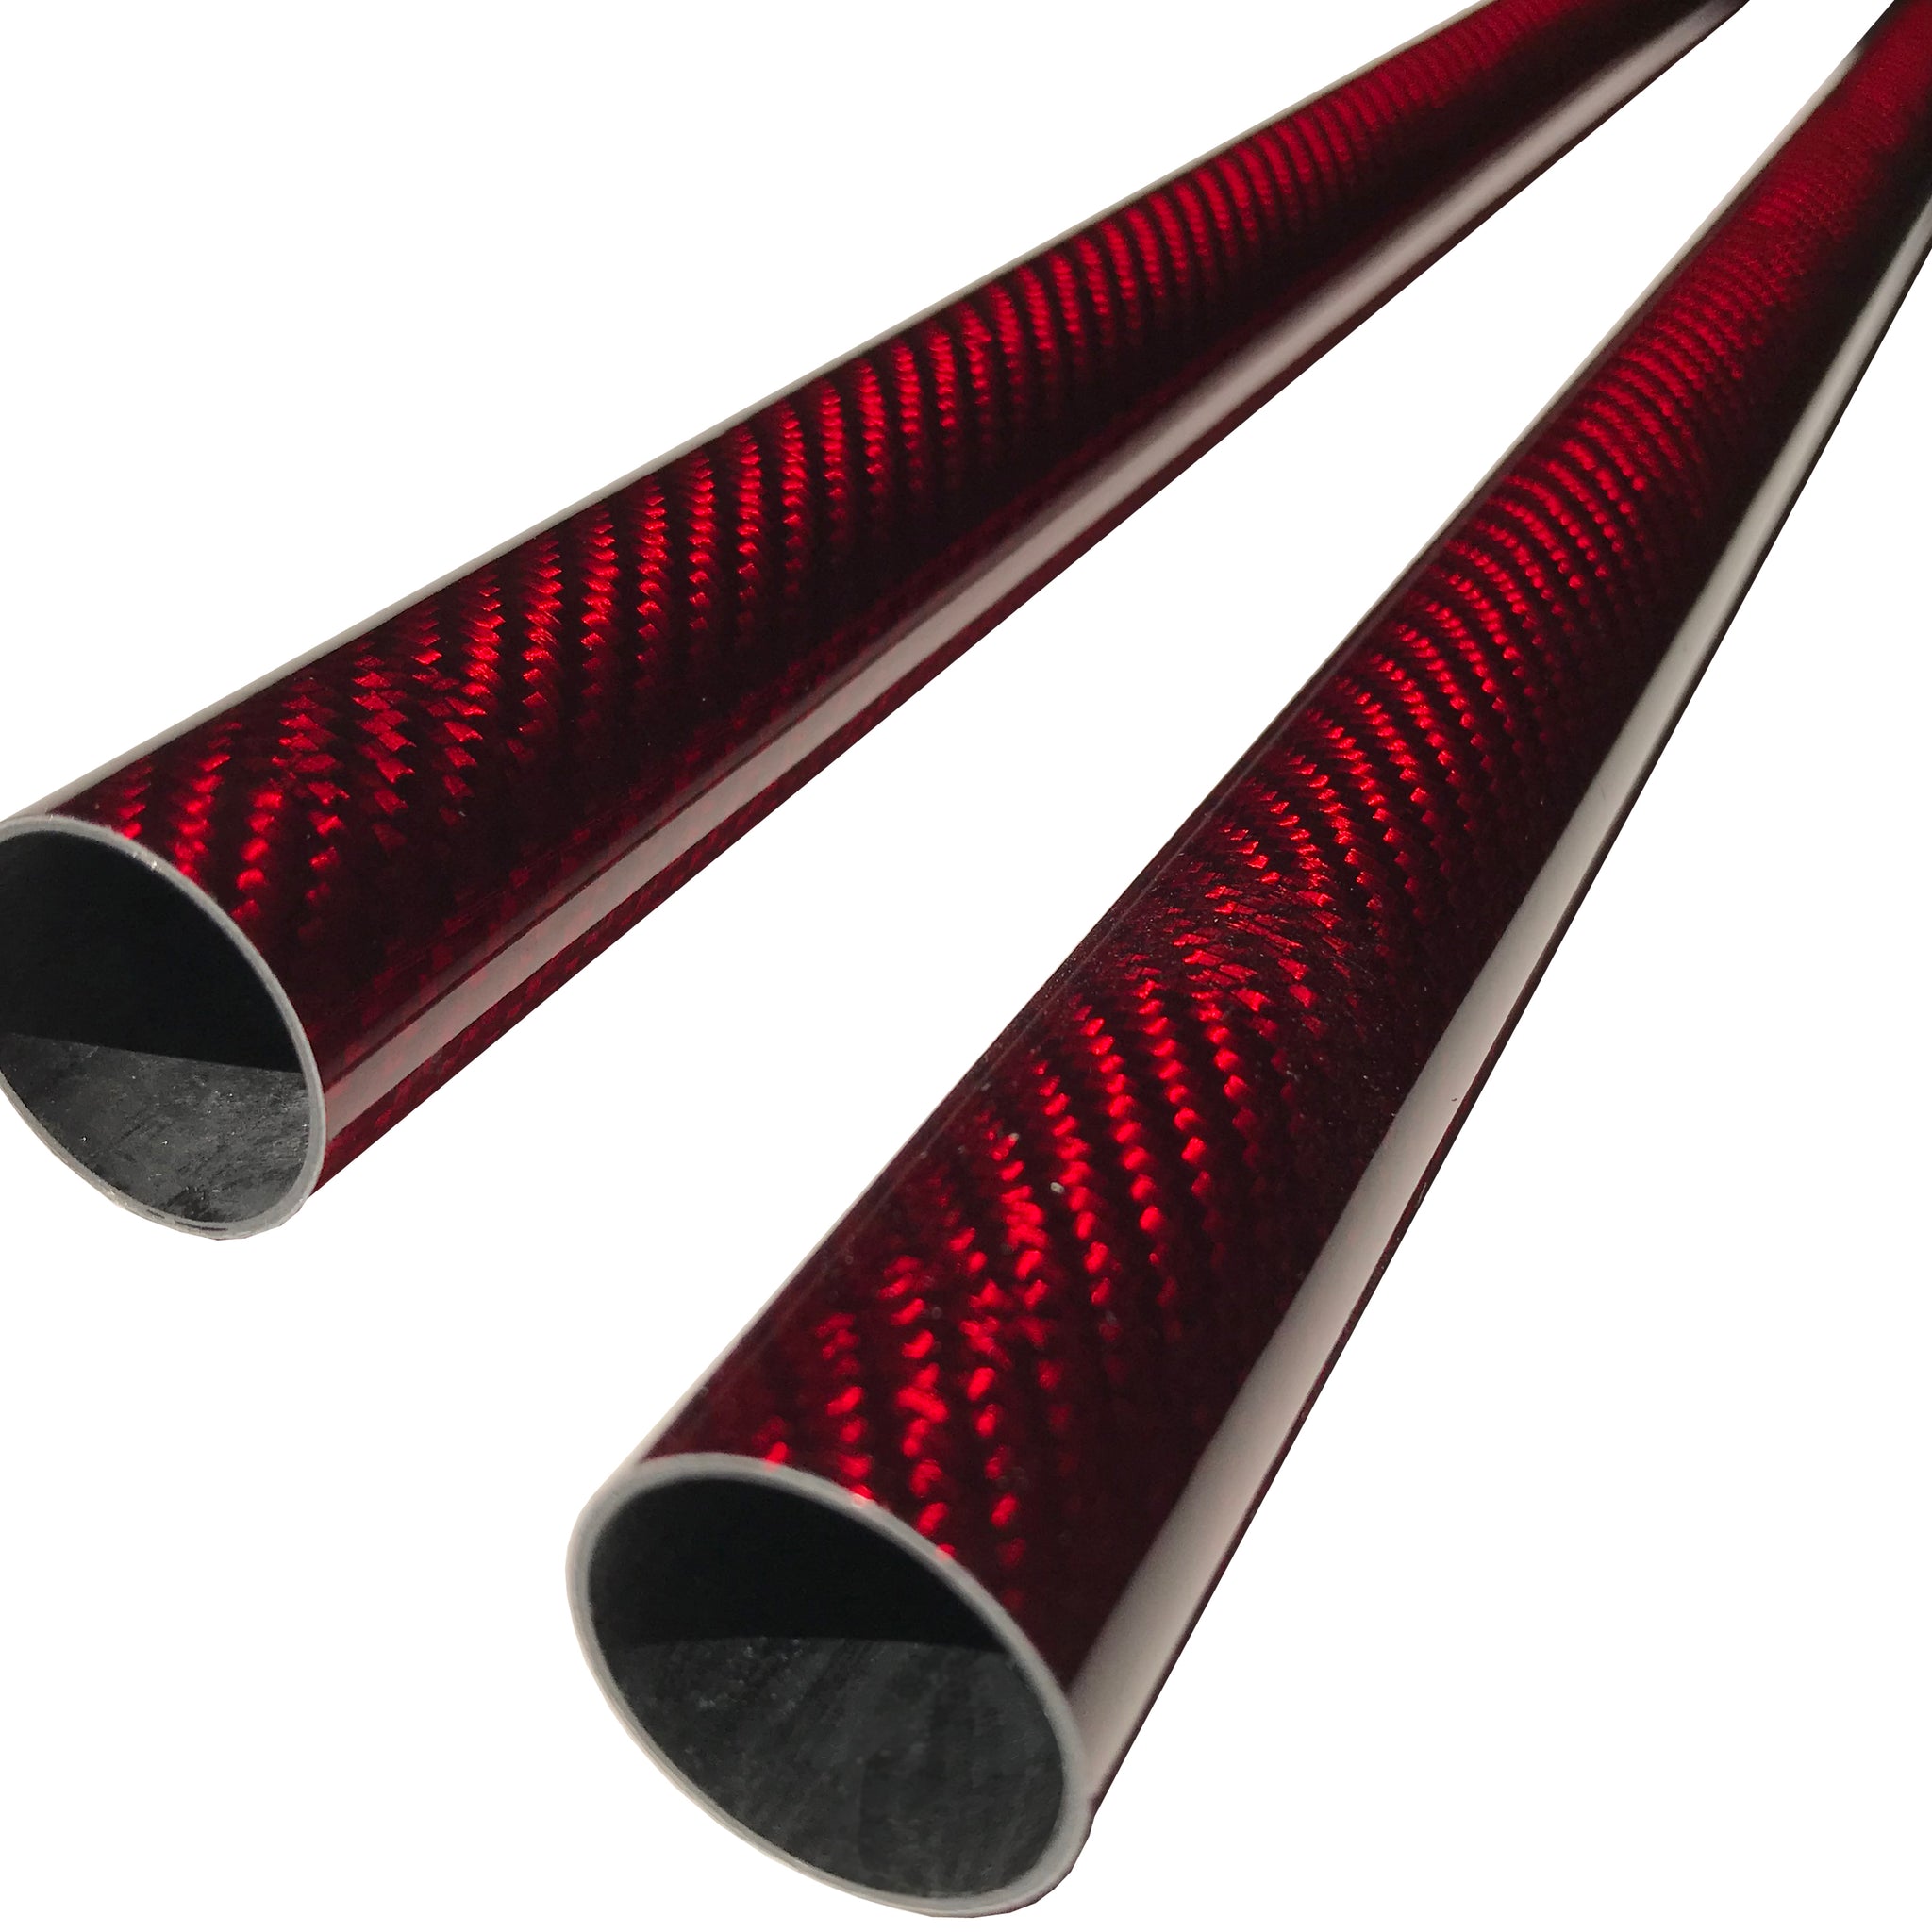 Carbon Fiber Tube - 25mm x 23mm x 500mm - 3K Roll Wrapped 100% Carbon Fiber  Tube Glossy Surface